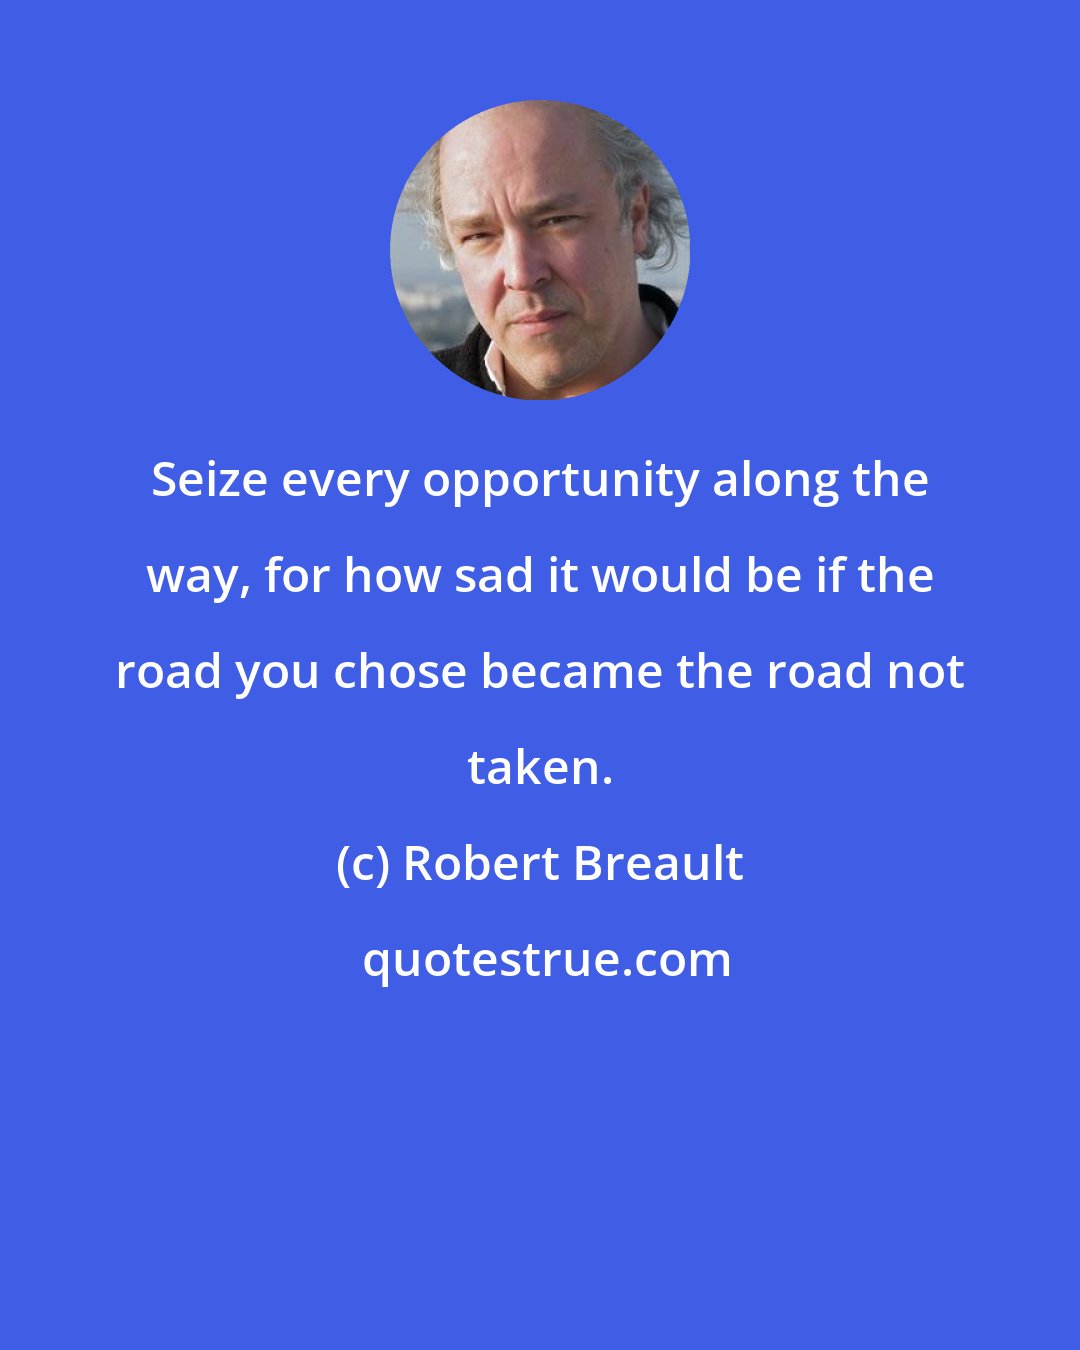 Robert Breault: Seize every opportunity along the way, for how sad it would be if the road you chose became the road not taken.